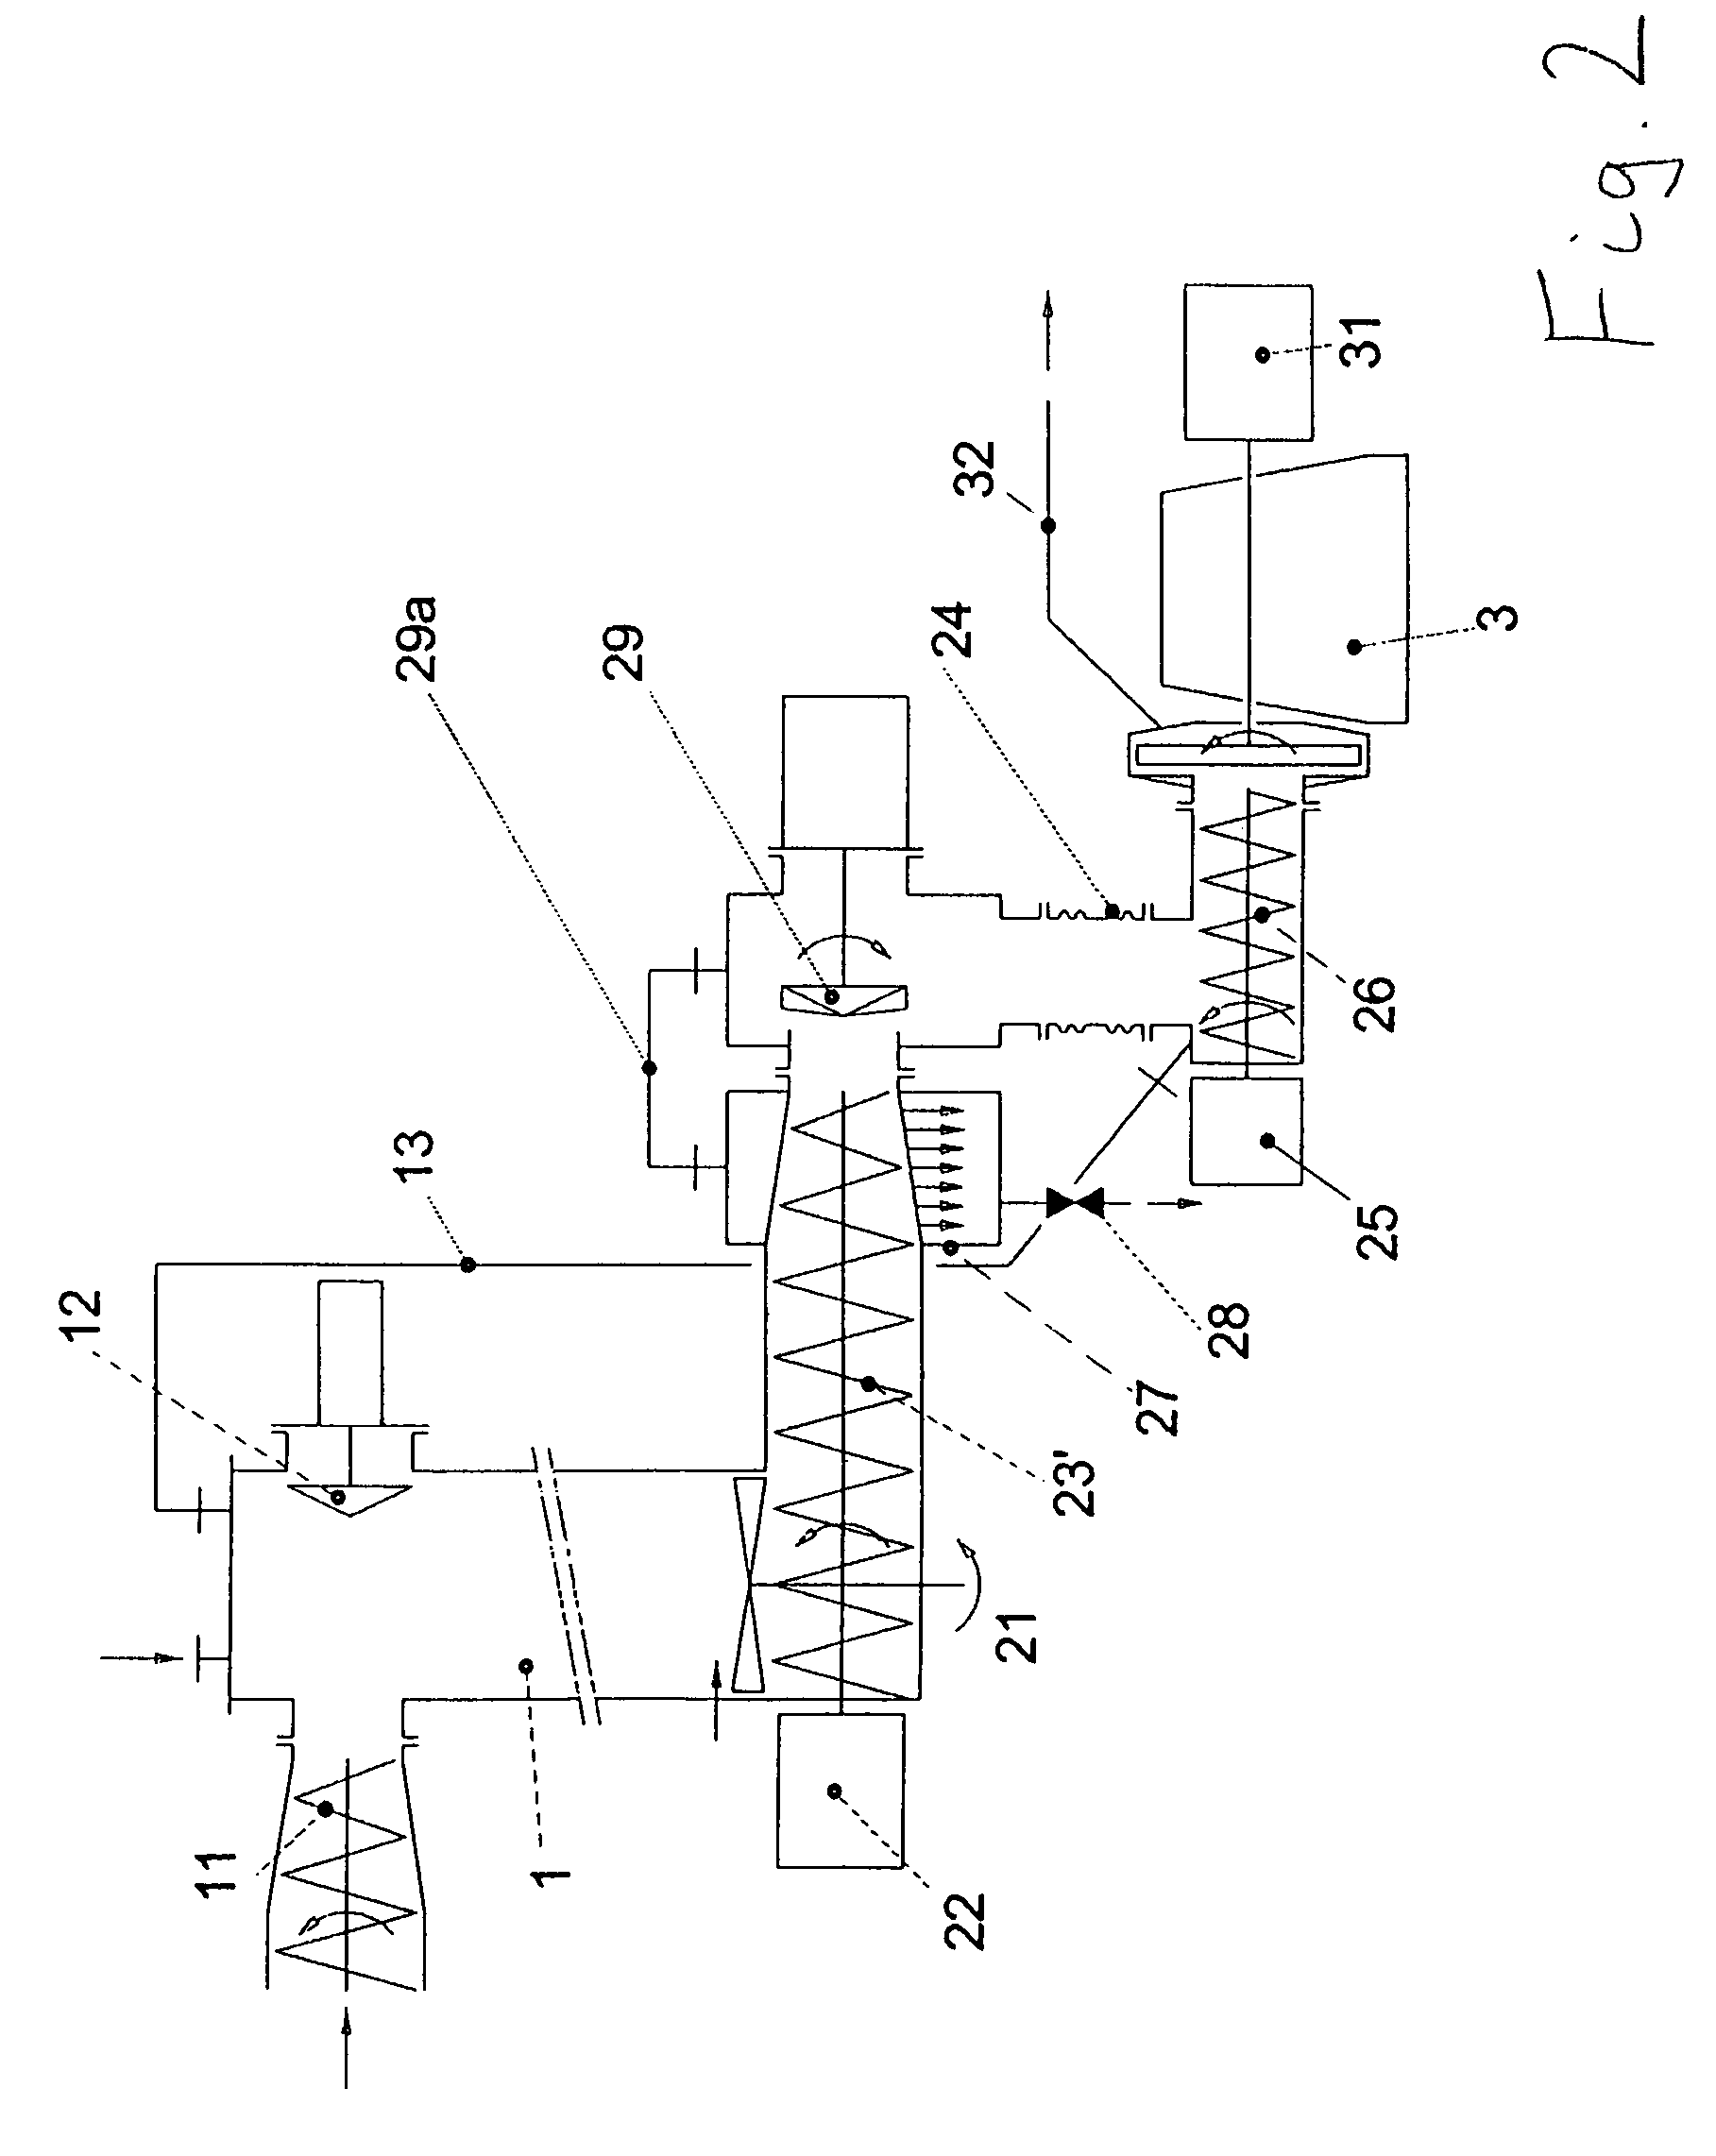 Process and device for discharging lignocellulose raw materials from a digester and conveying the raw material to a refiner